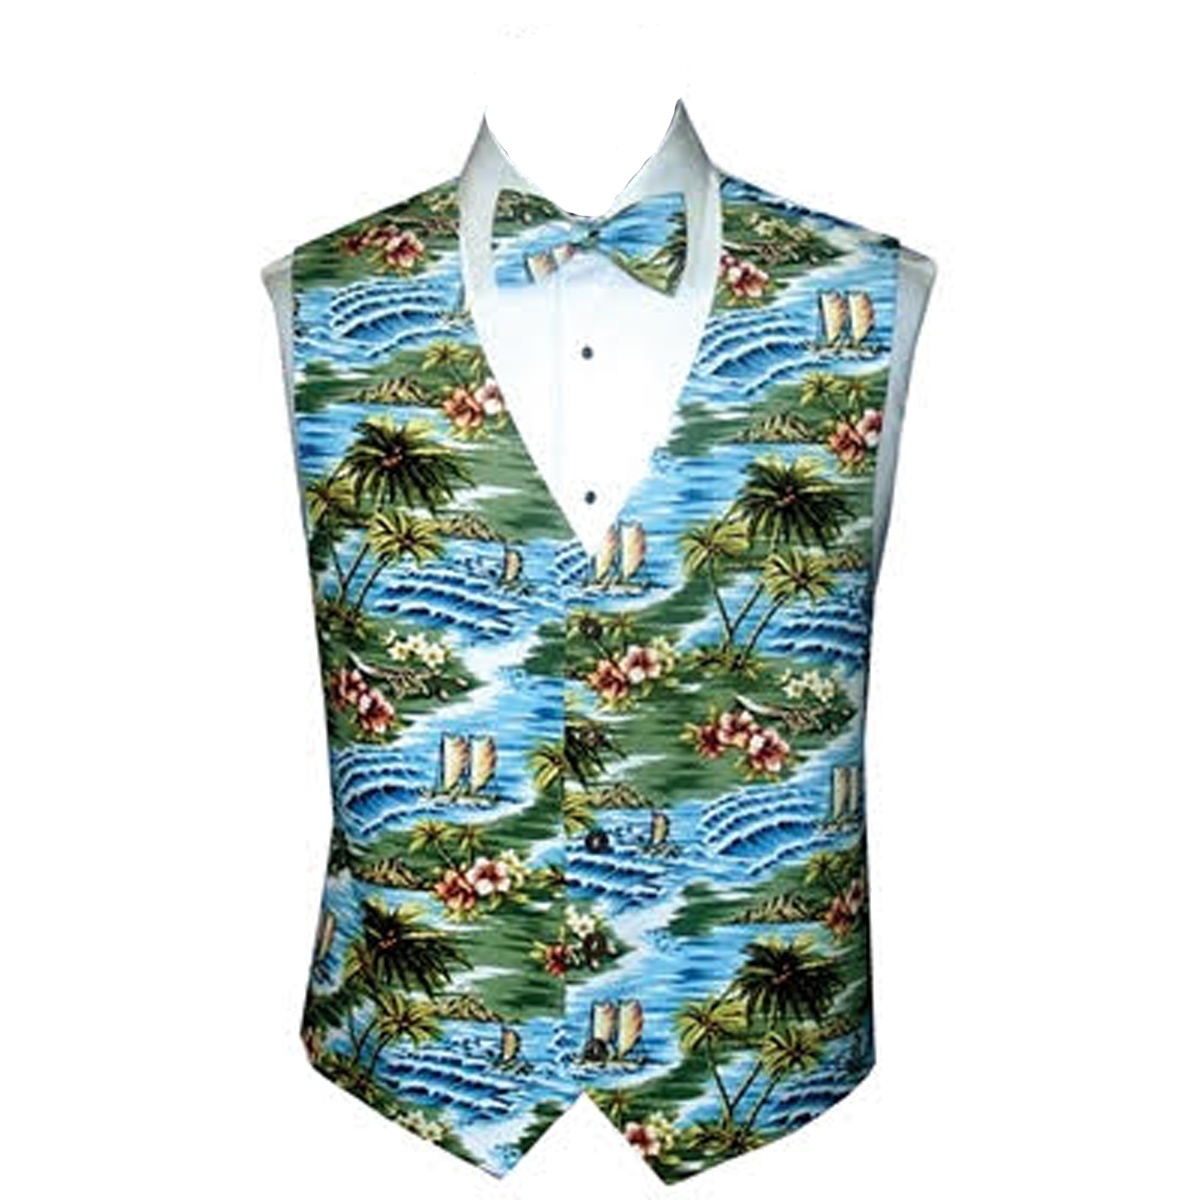 Seamist Green Tropical Island Vest and Tie